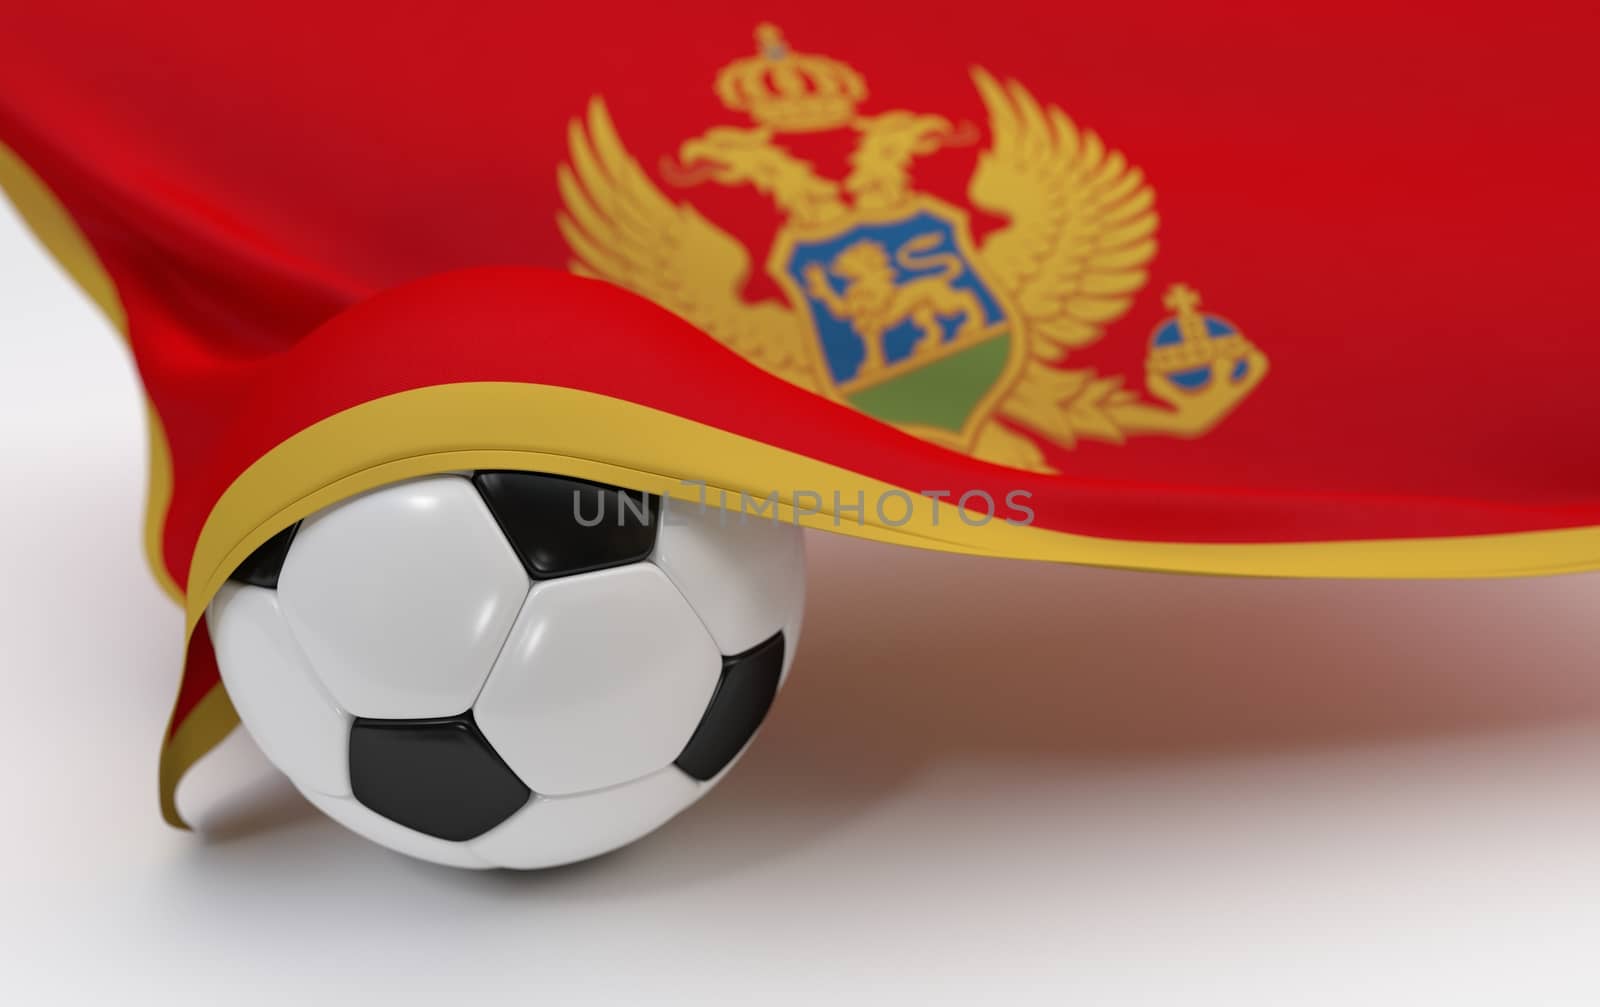 Montenegro flag with championship soccer ball by Barbraford